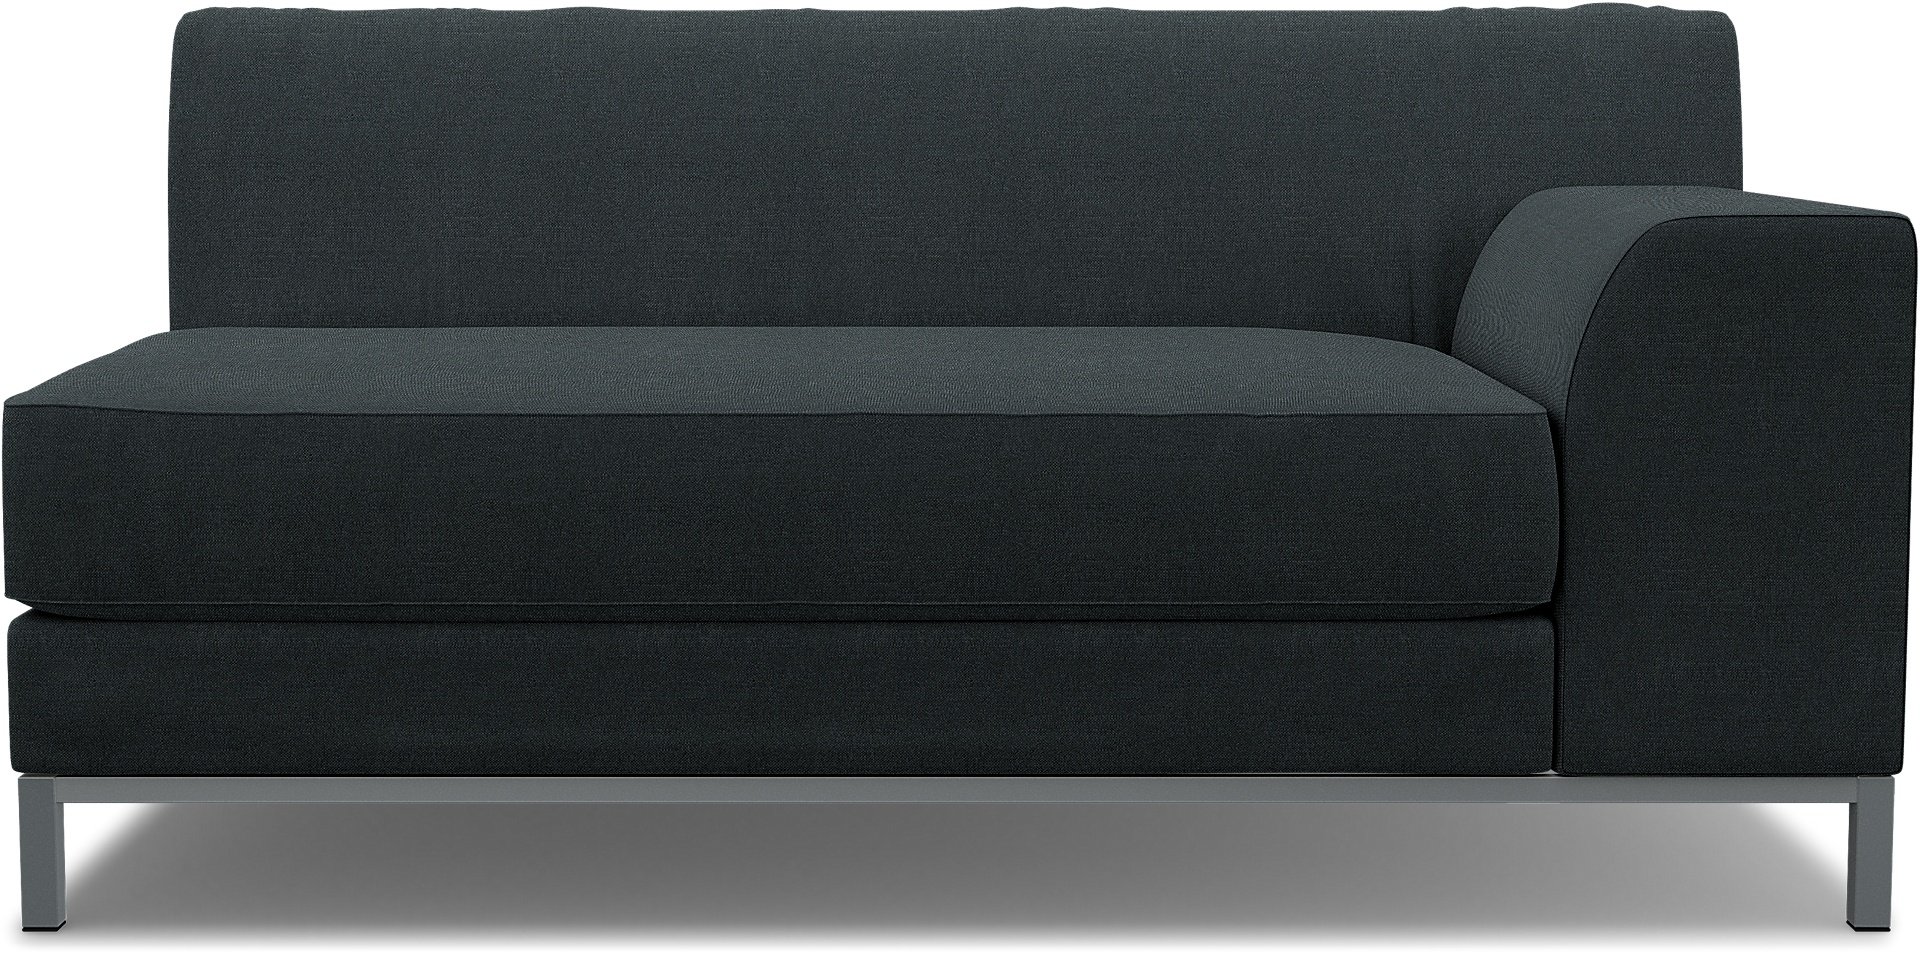 IKEA - Kramfors 2 Seater Sofa with Right Arm Cover, Graphite Grey, Linen - Bemz